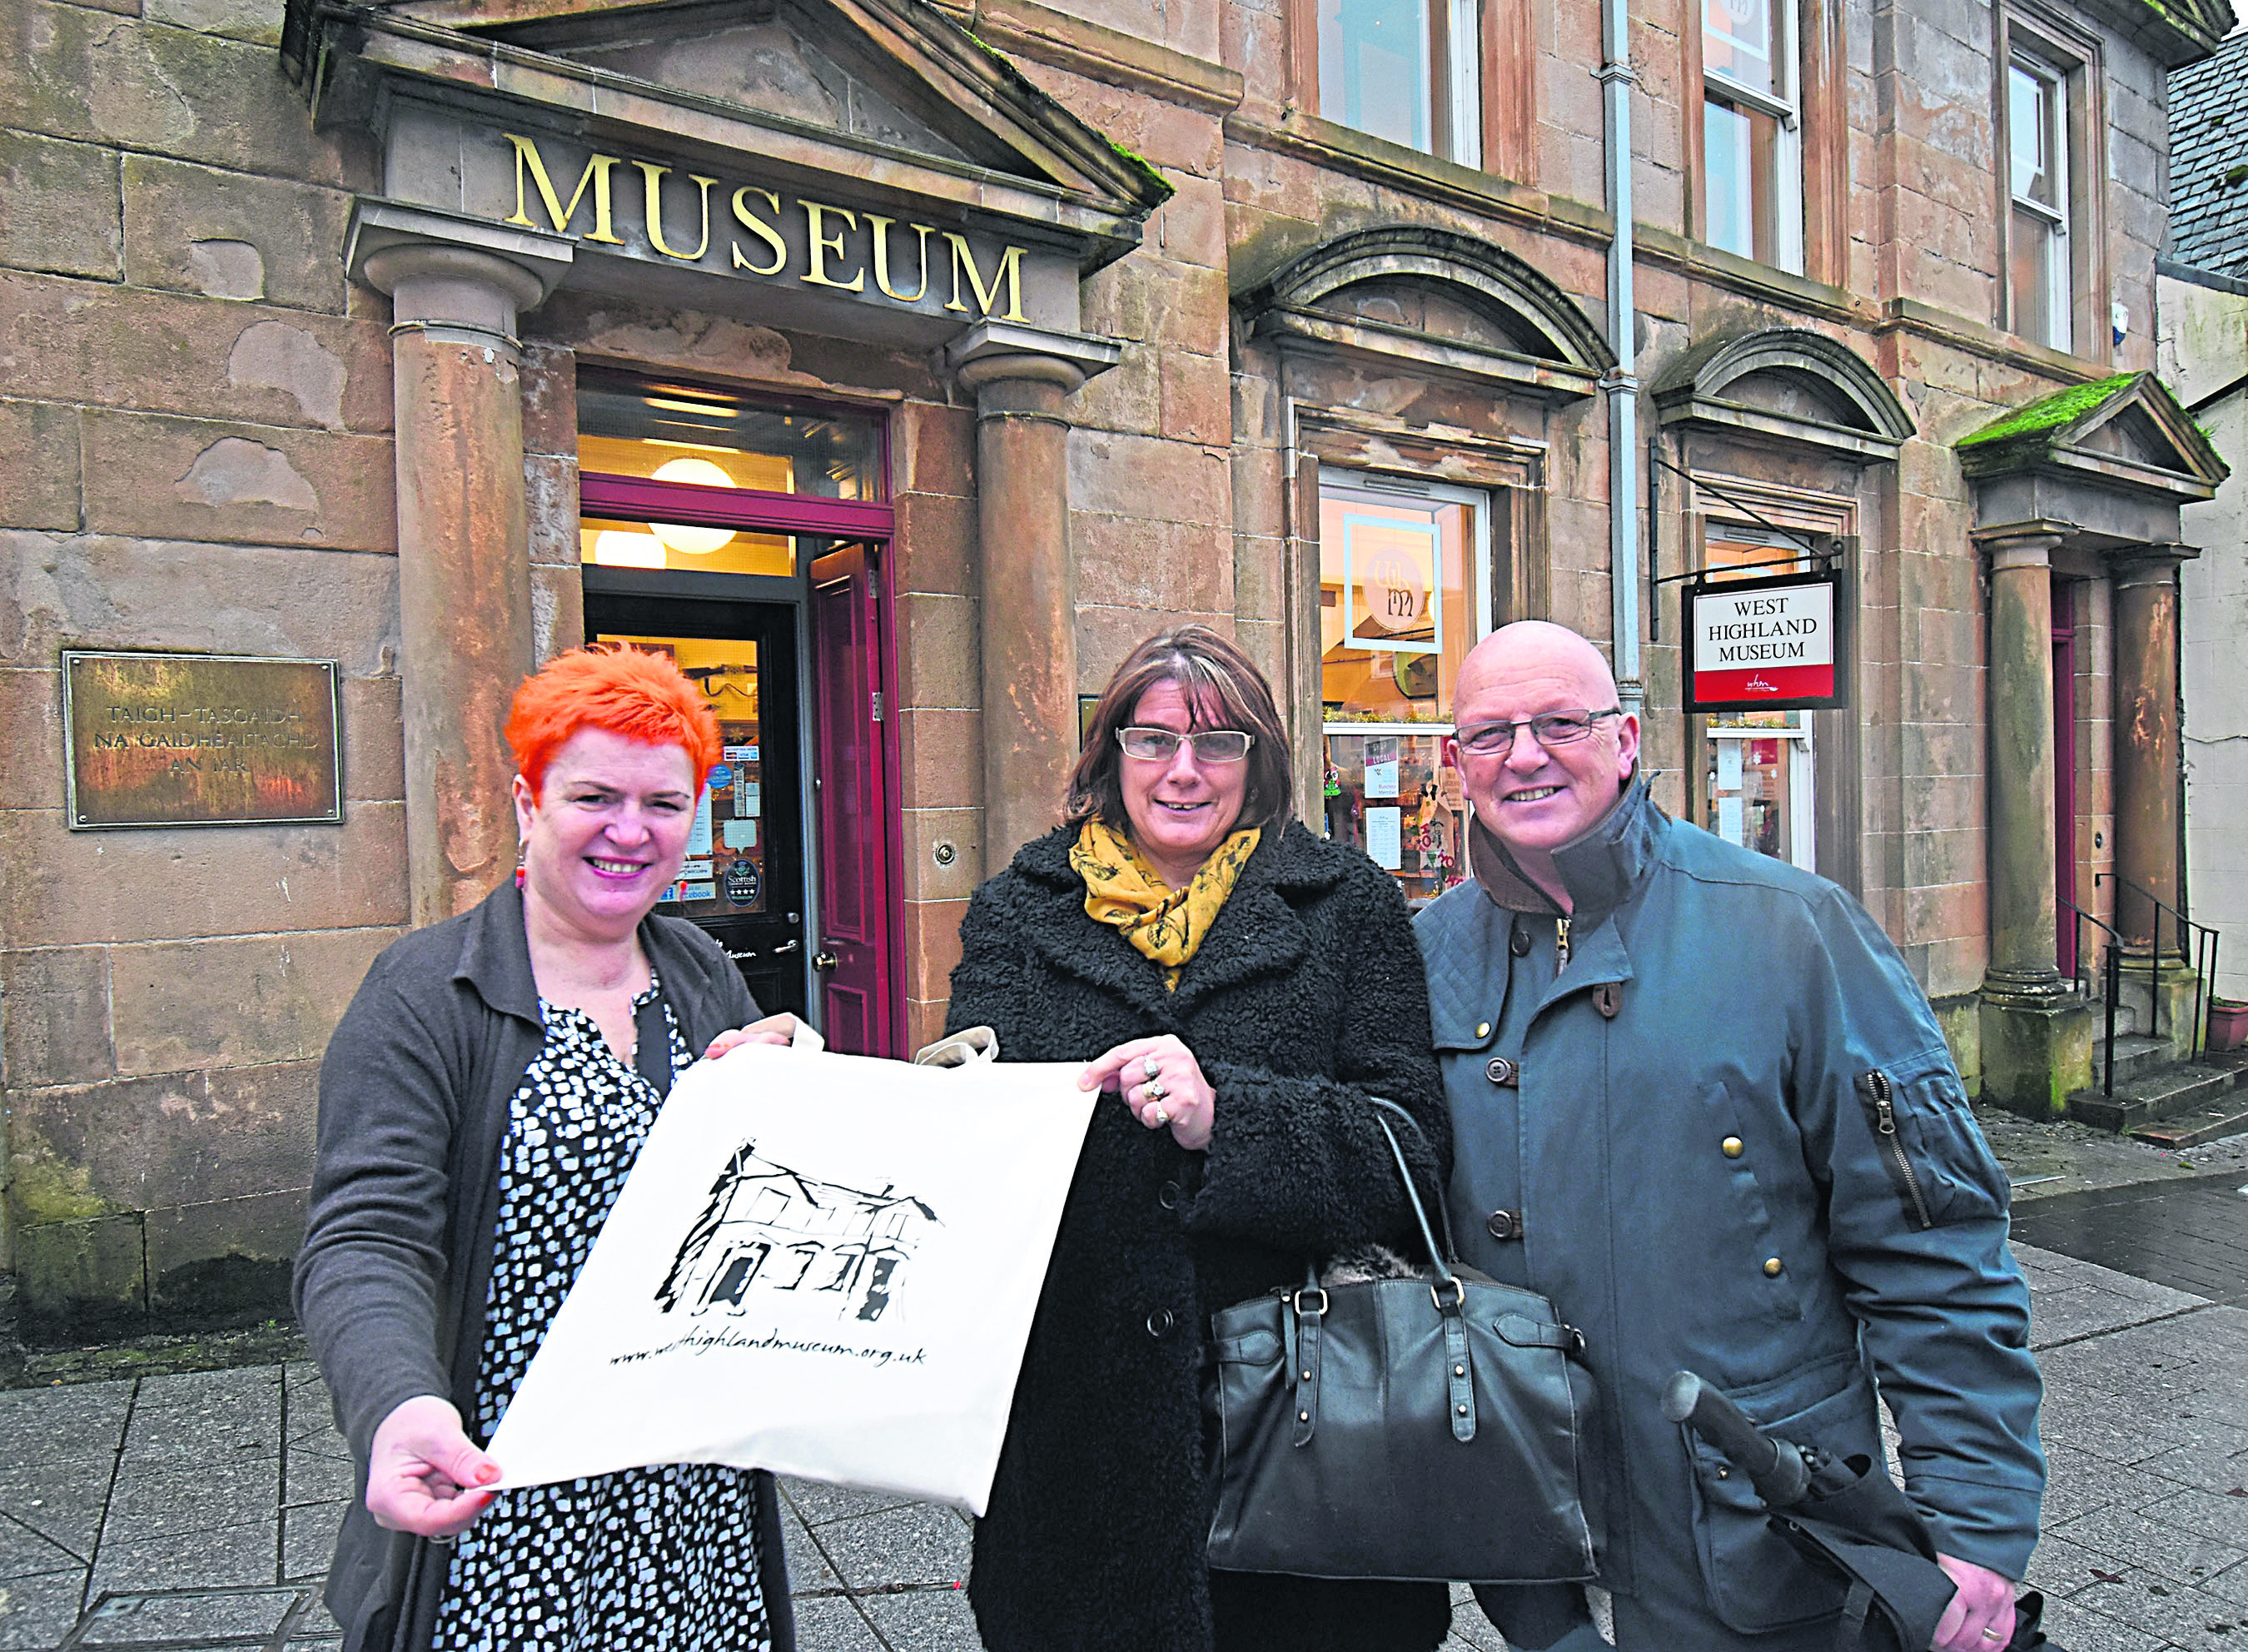 West Highland Museum Manager, Colleen Barker (left) presents a gift of museum mementos to Sarah Dunge ( her husband Mark), who became their 56,000th visitor in 2018.